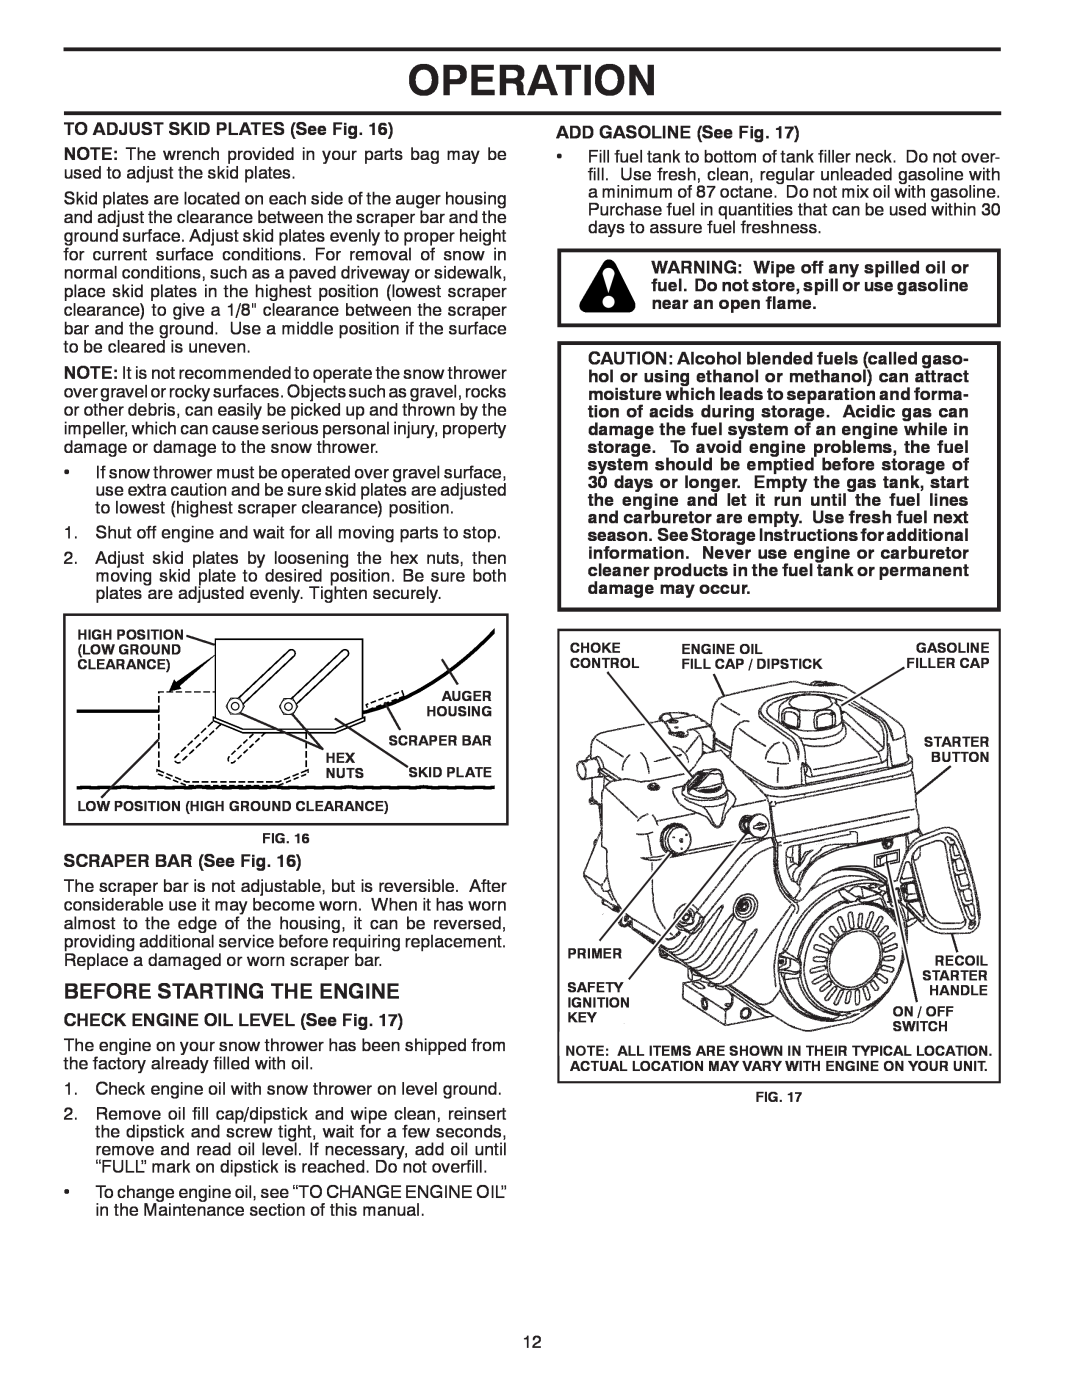 Poulan 436134, 96192004300 Before Starting The Engine, Operation, TO ADJUST SKID PLATES See Fig, SCRAPER BAR See Fig 